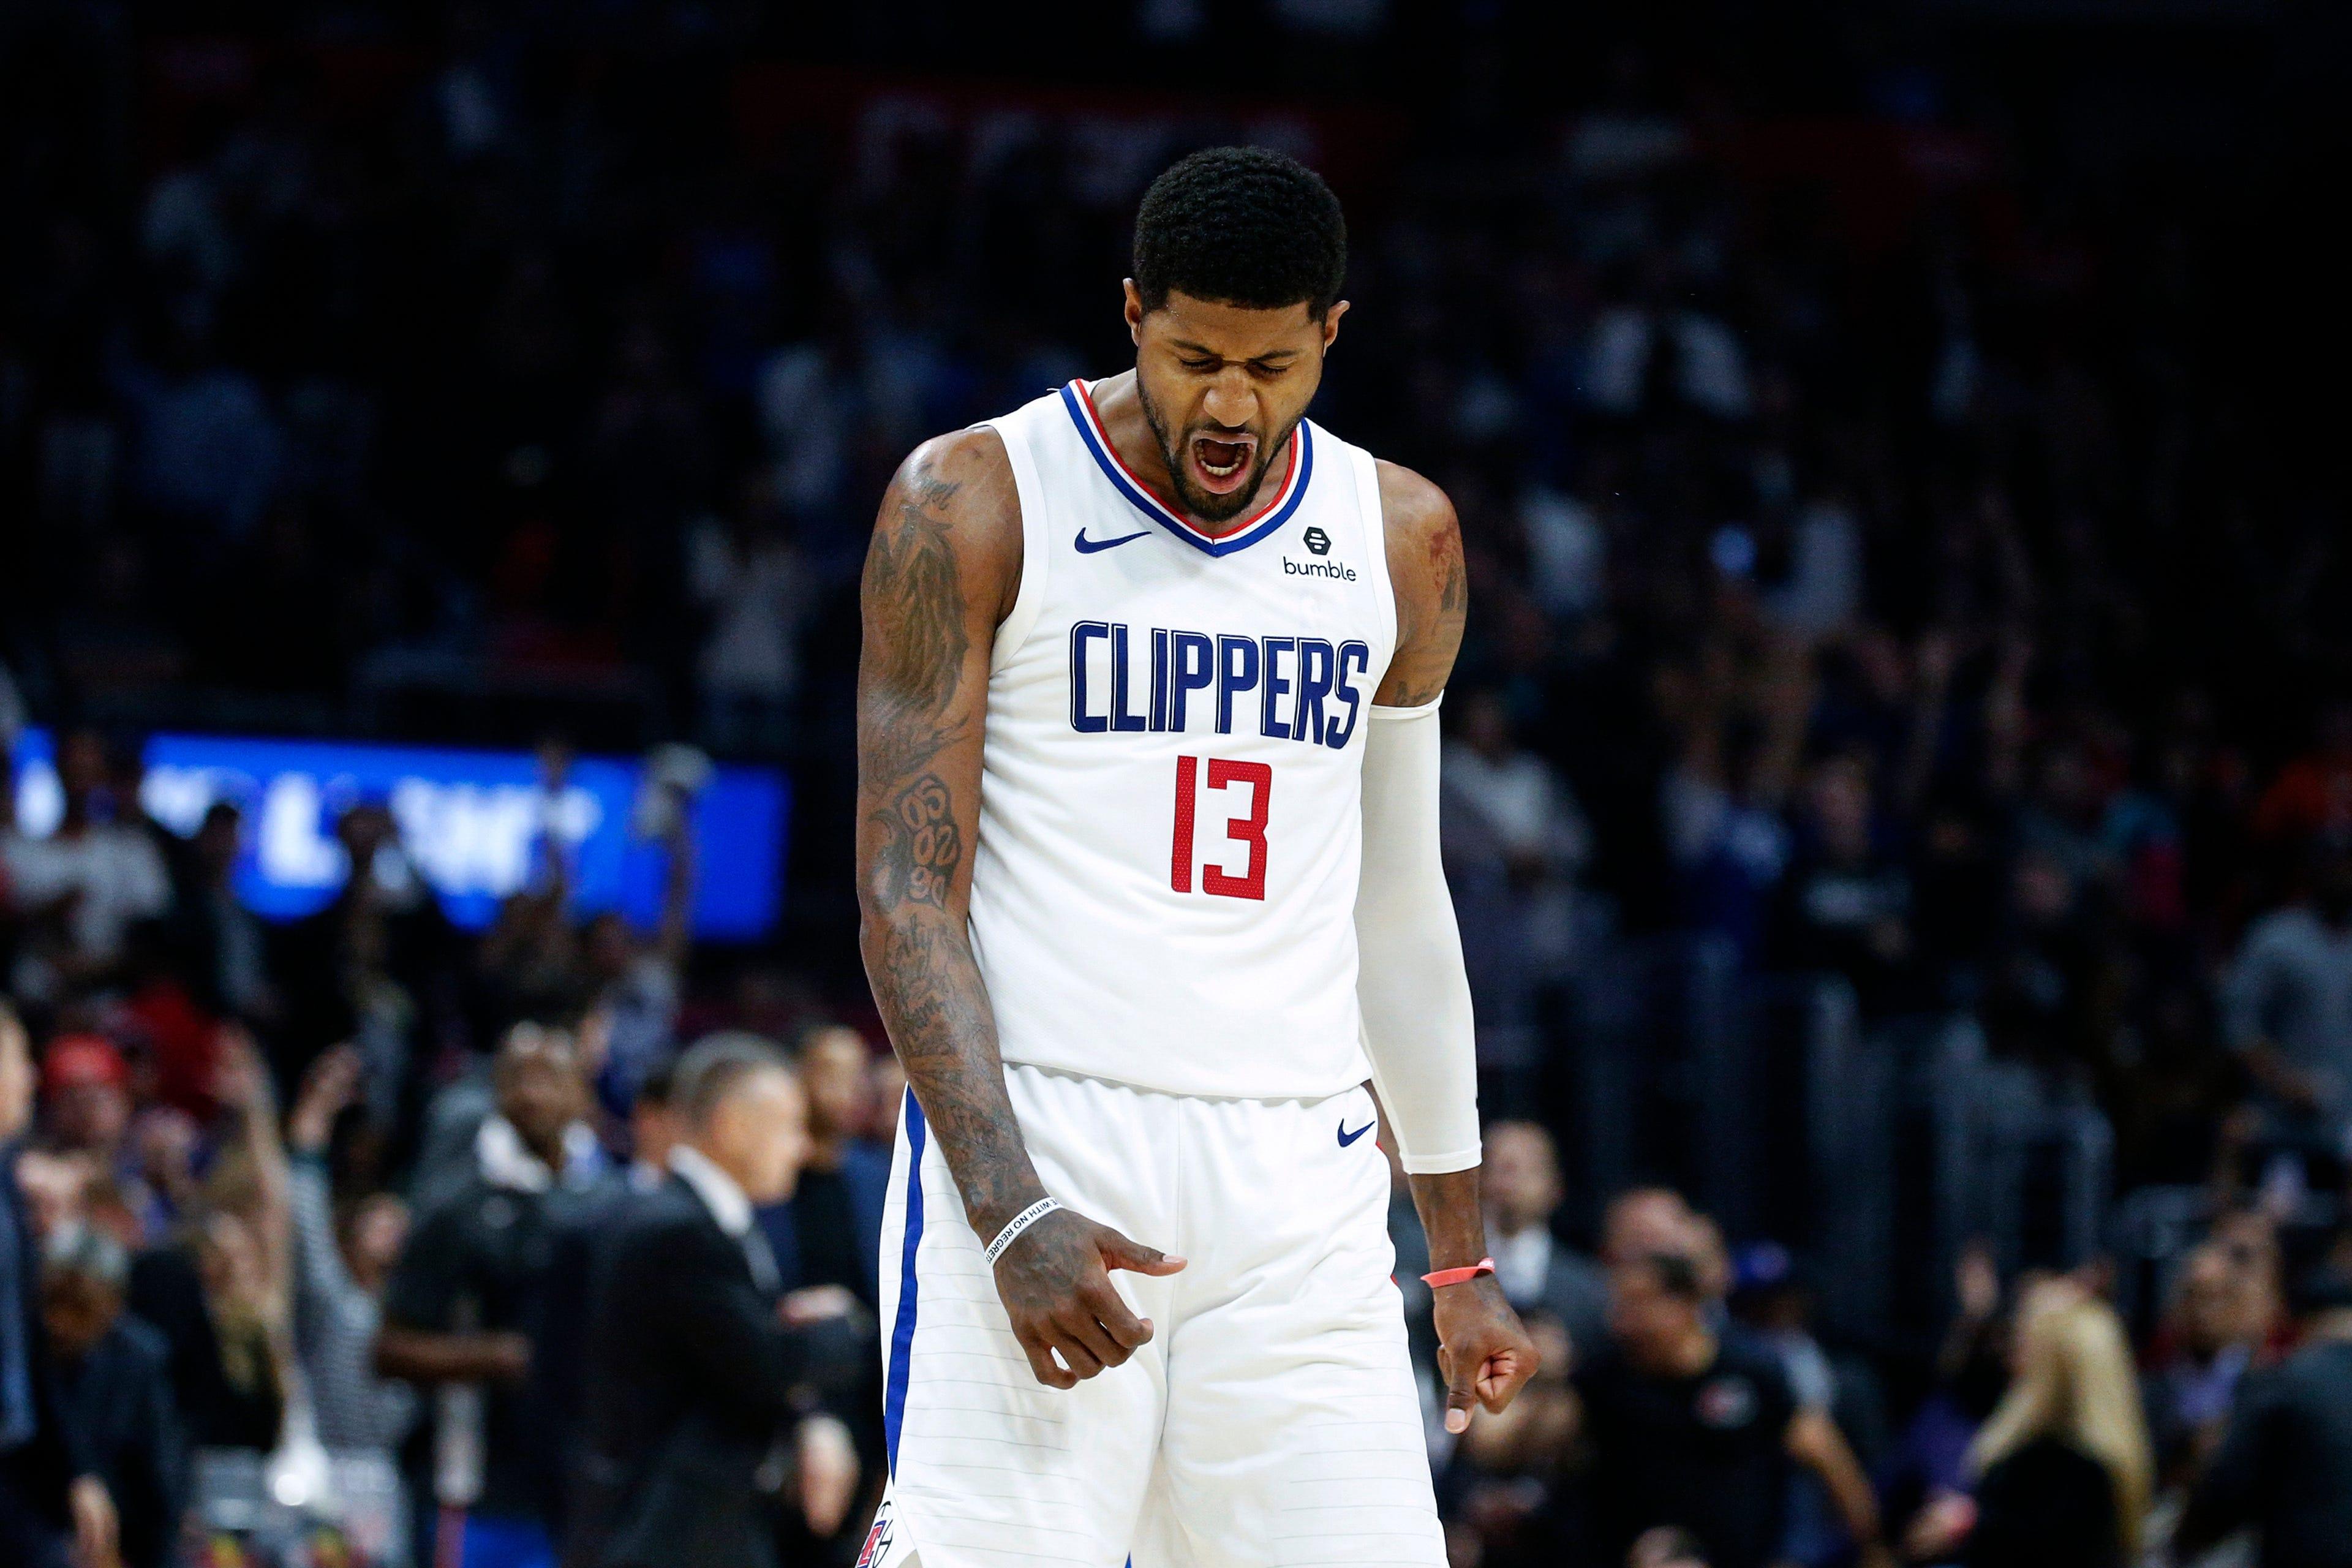 Paul George: Star haunts Thunder with clutch 3 to lead Clippers.